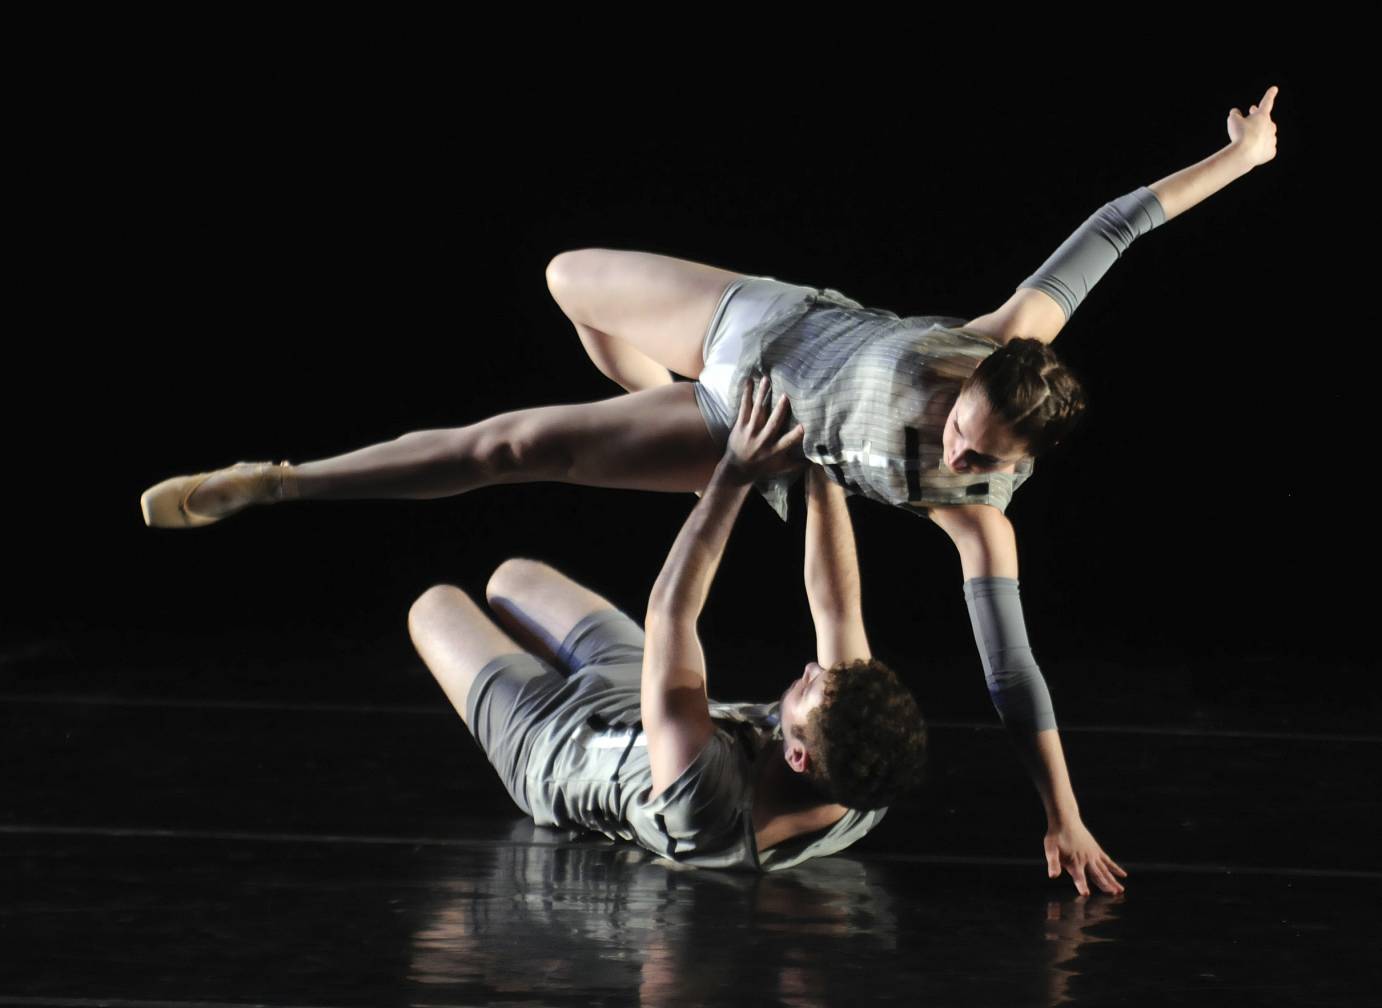 A man lying on the ground partners a woman in pointe shoes to leap over him